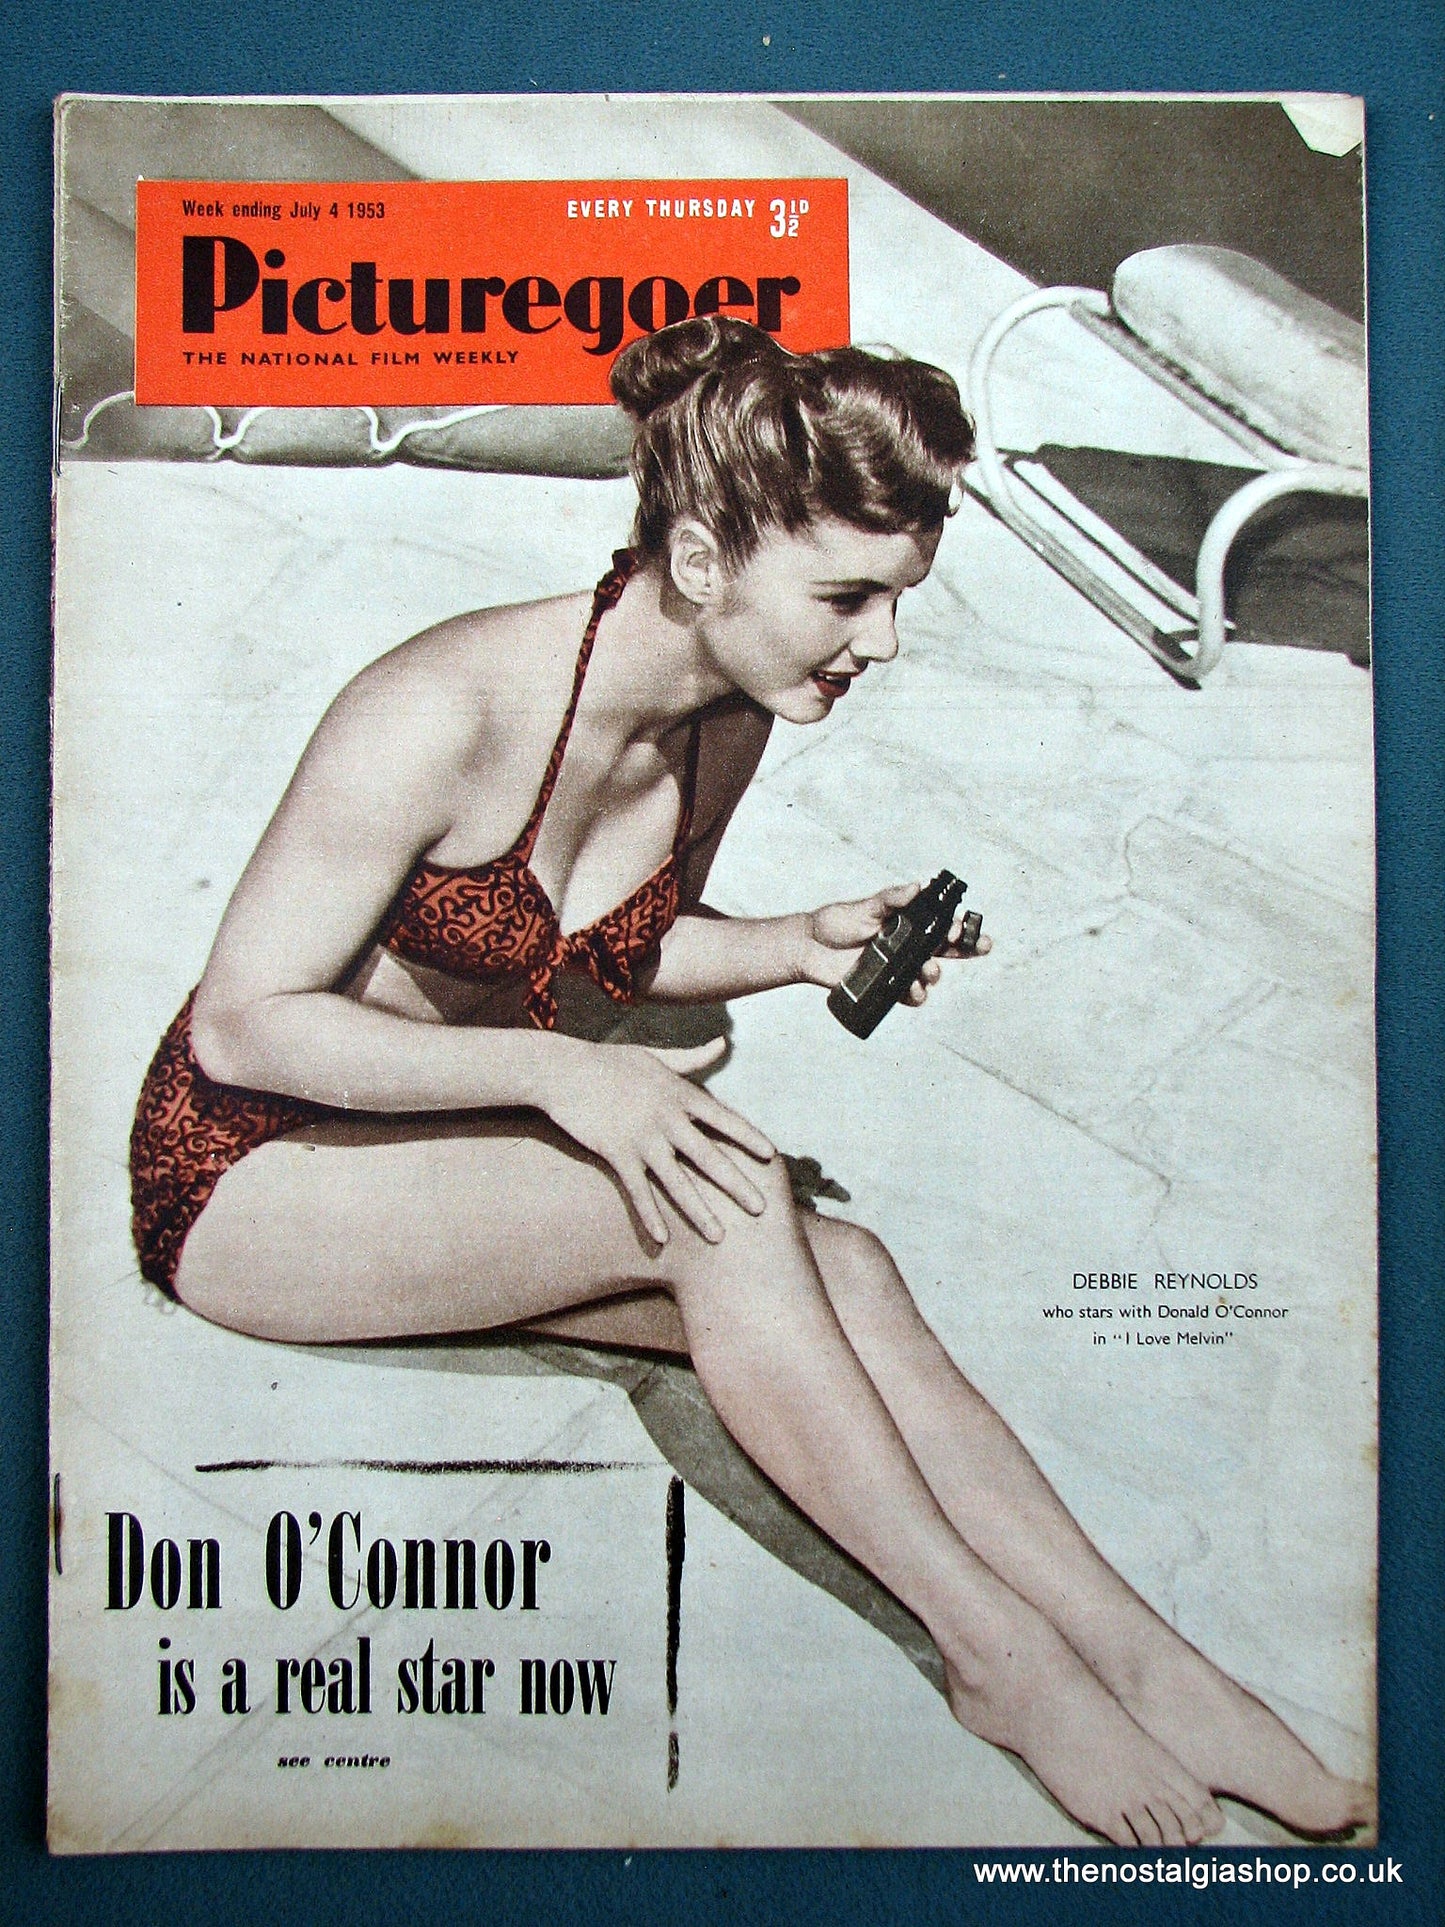 Picturegoer Magazine. Lot of 4 From 1953. (M192)